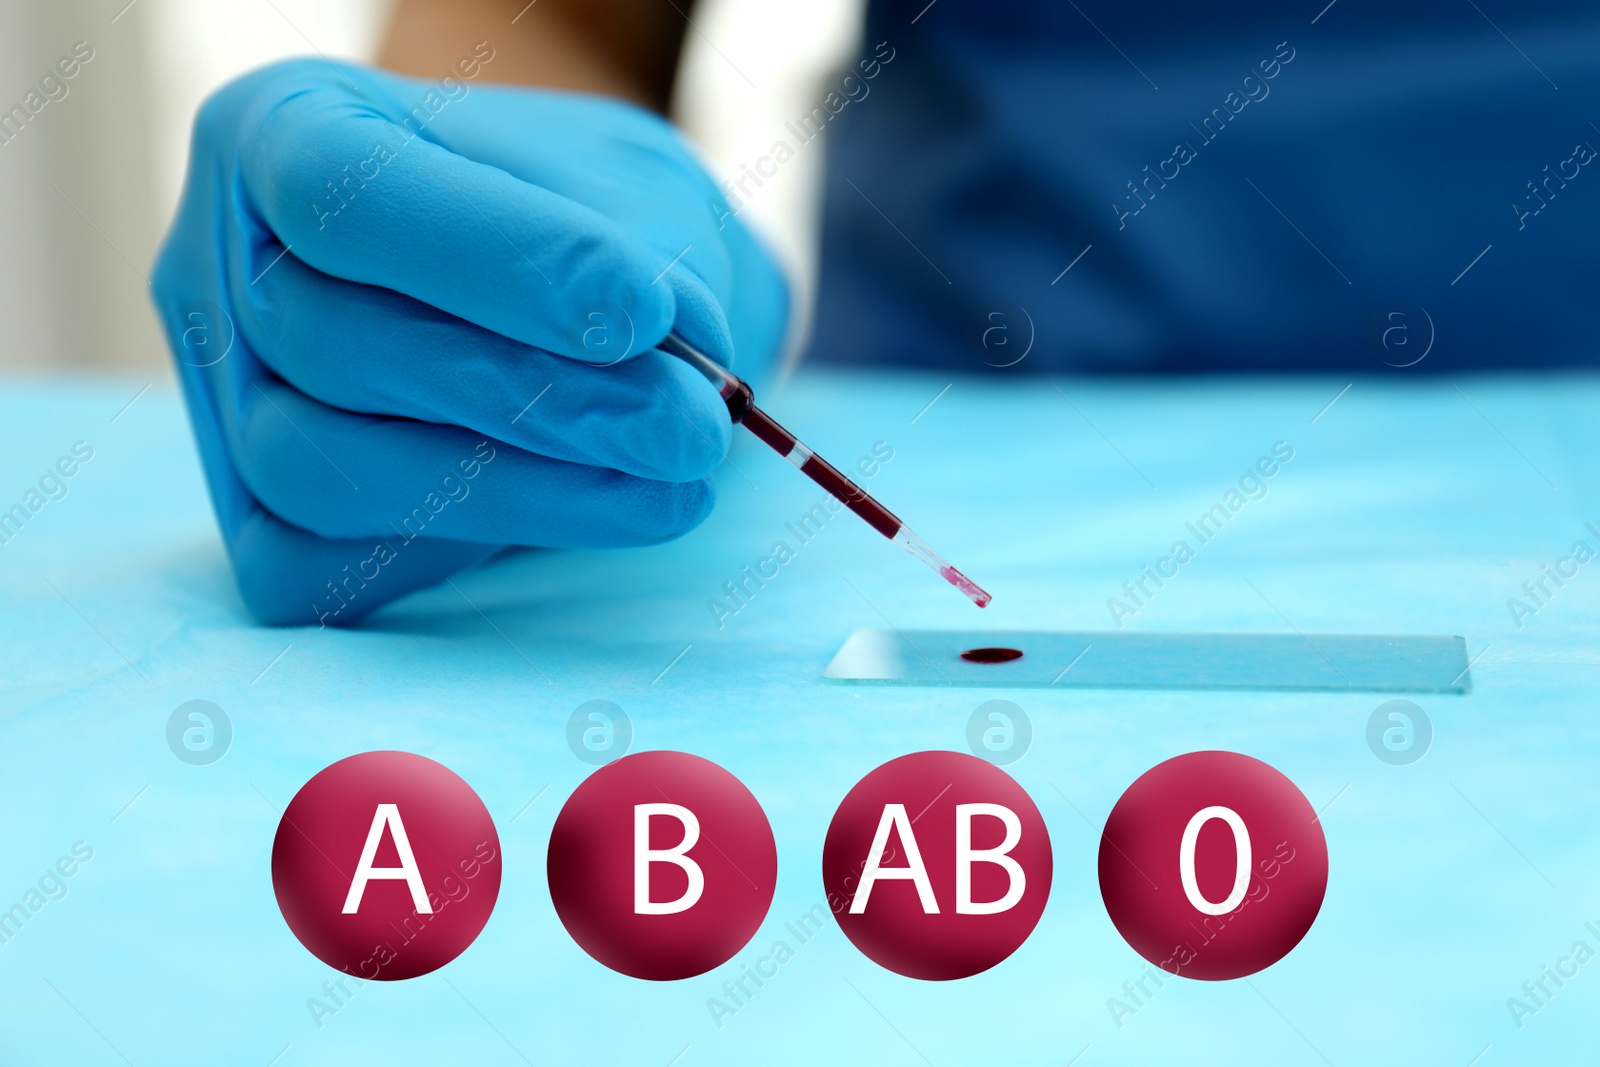 Image of Icons representing different blood types and scientist working with samples in laboratory, closeup